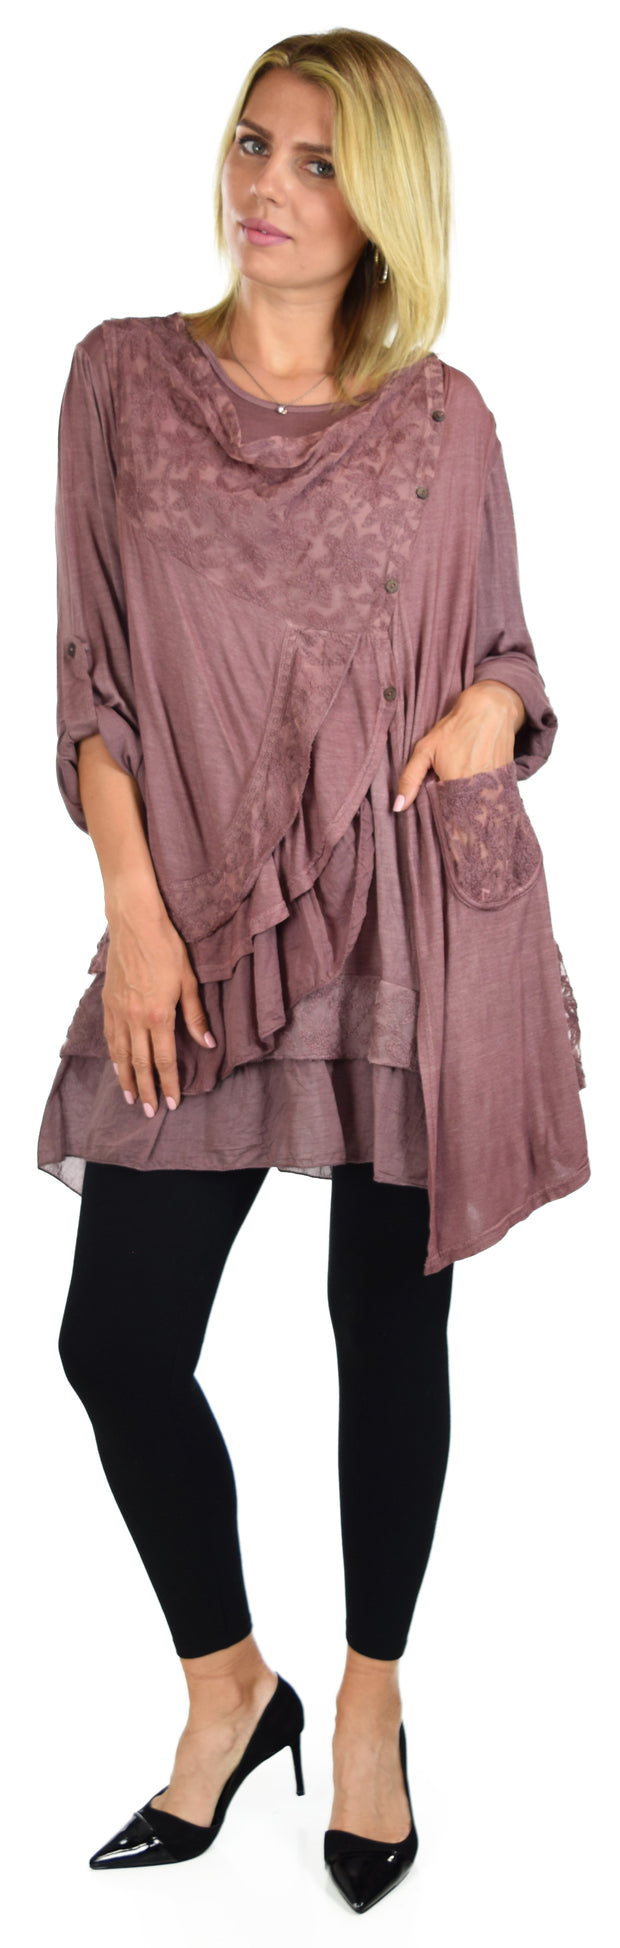 New Vintage Look Lace Tunic, Women Plus Size Tunic, 2 layeres Loose Fitting Lace Embroidered Tunic Blouse Top